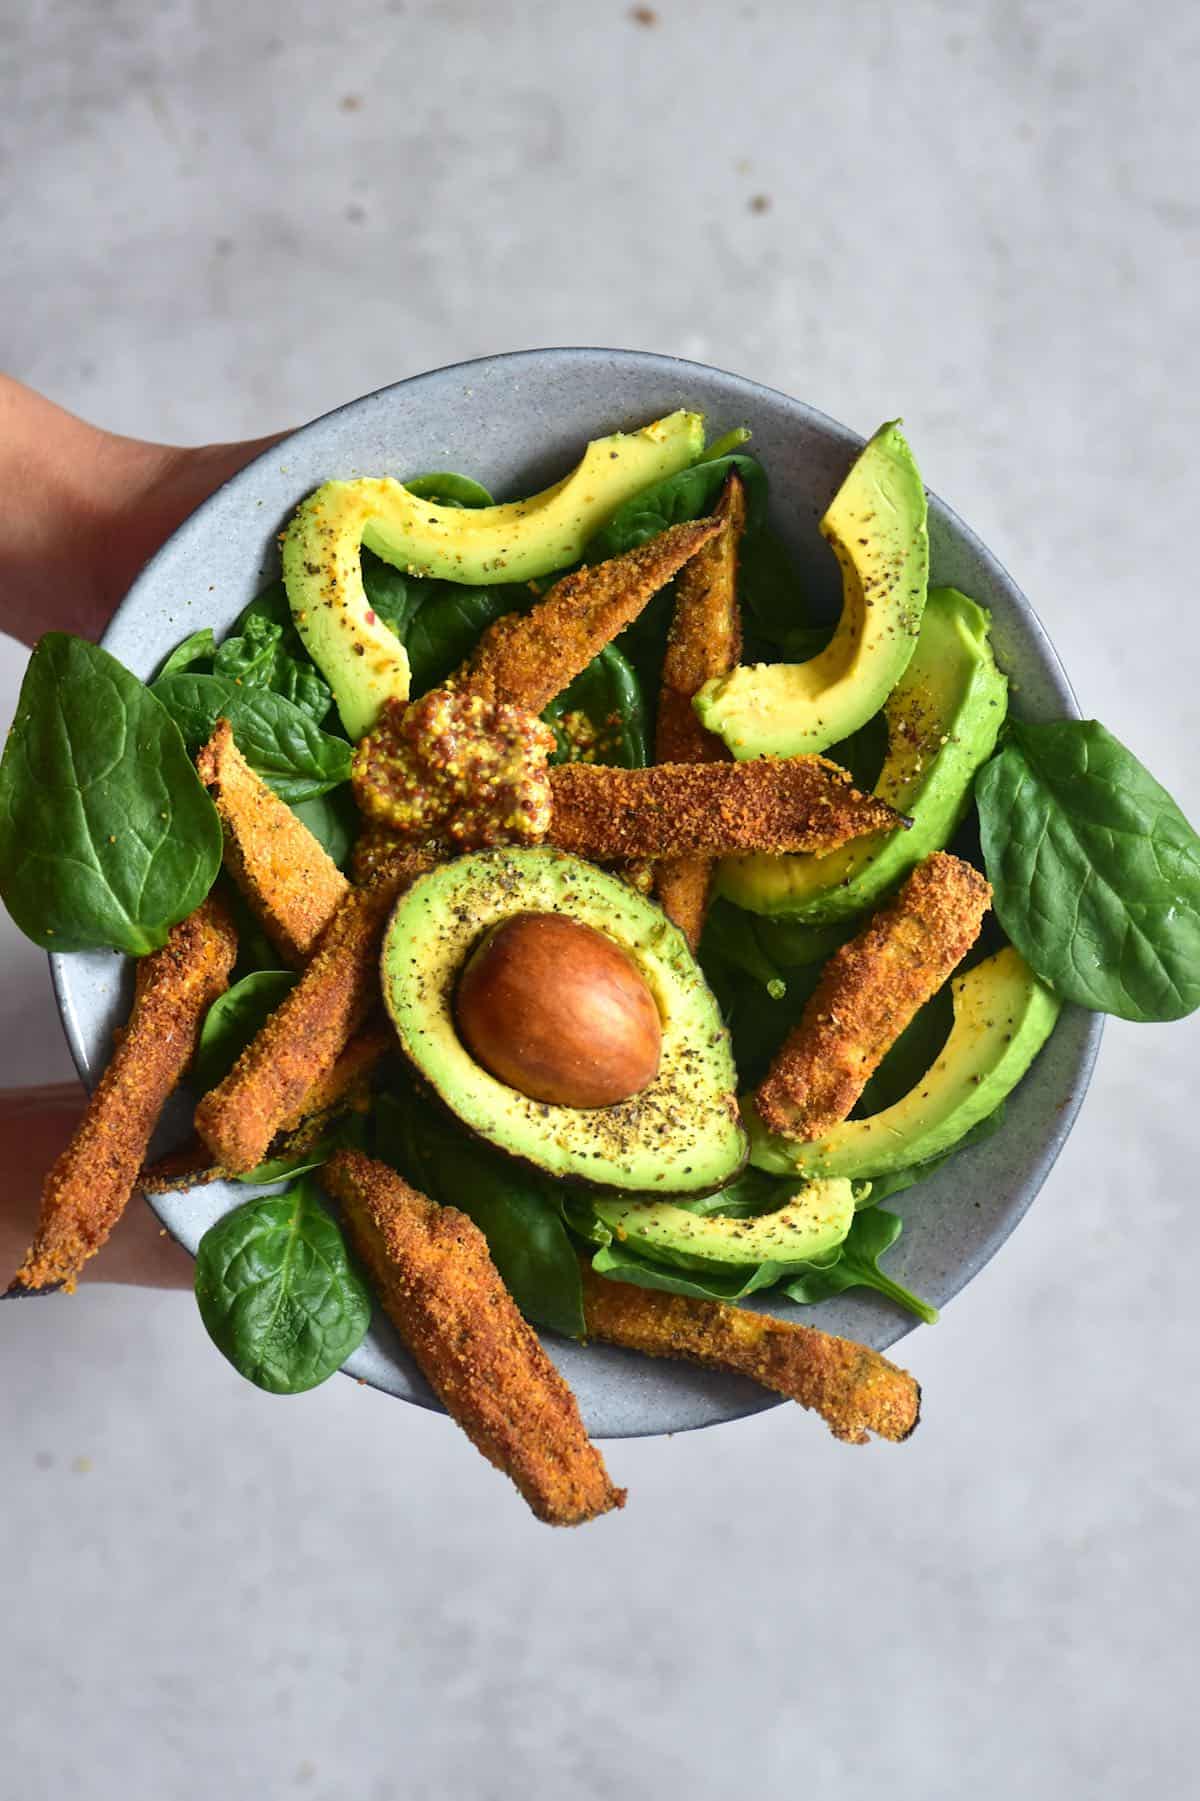 Baked eggplant fries served with spinach and avocado in a bowl